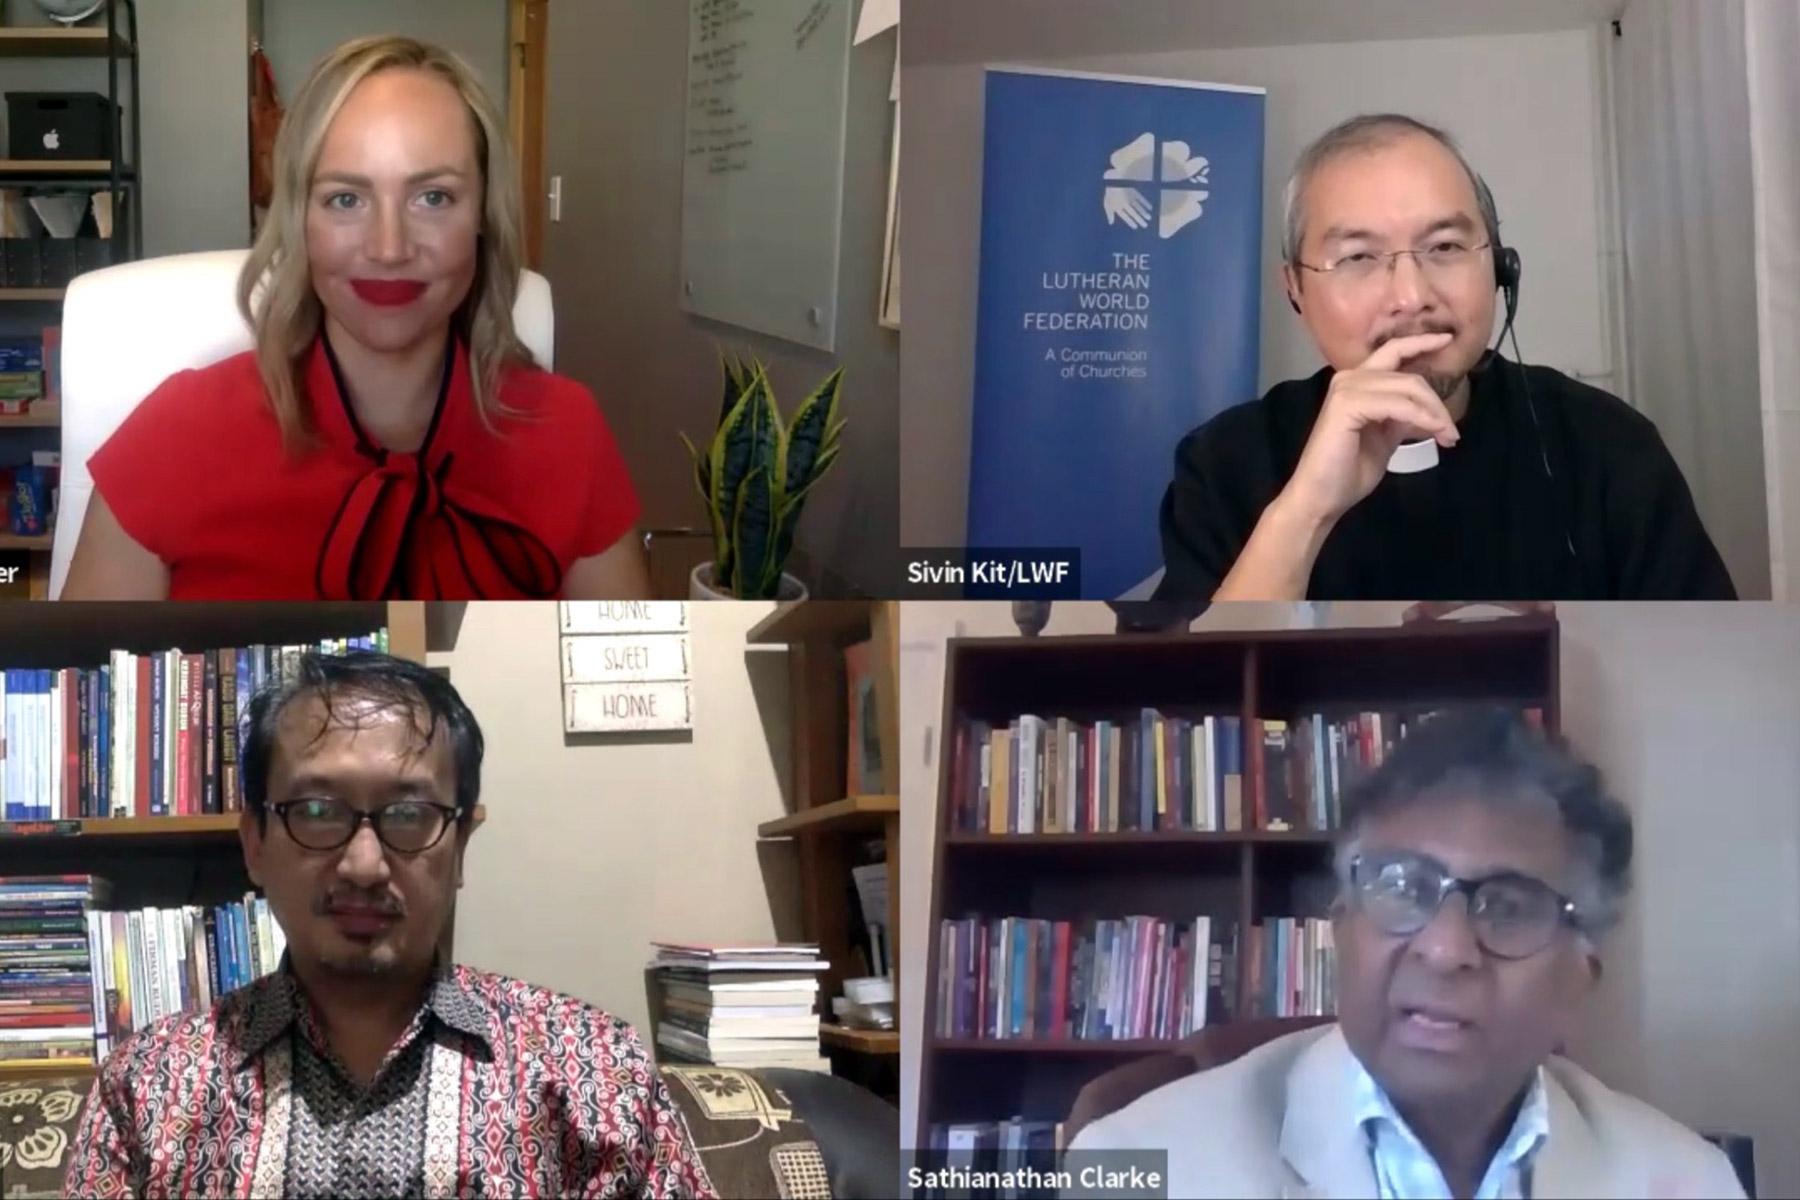 Panelists discussing global responses to religious nationalism: clockwise from top left, ELCA pastor Rev. Angela Denker, LWF moderator Rev. Dr Sivin Kit, Dr Sathianathan Clarke of Wesley Theological Seminary and Dr Dicky Sofjan of the ICRS. Photo: Screenshot from the webinar